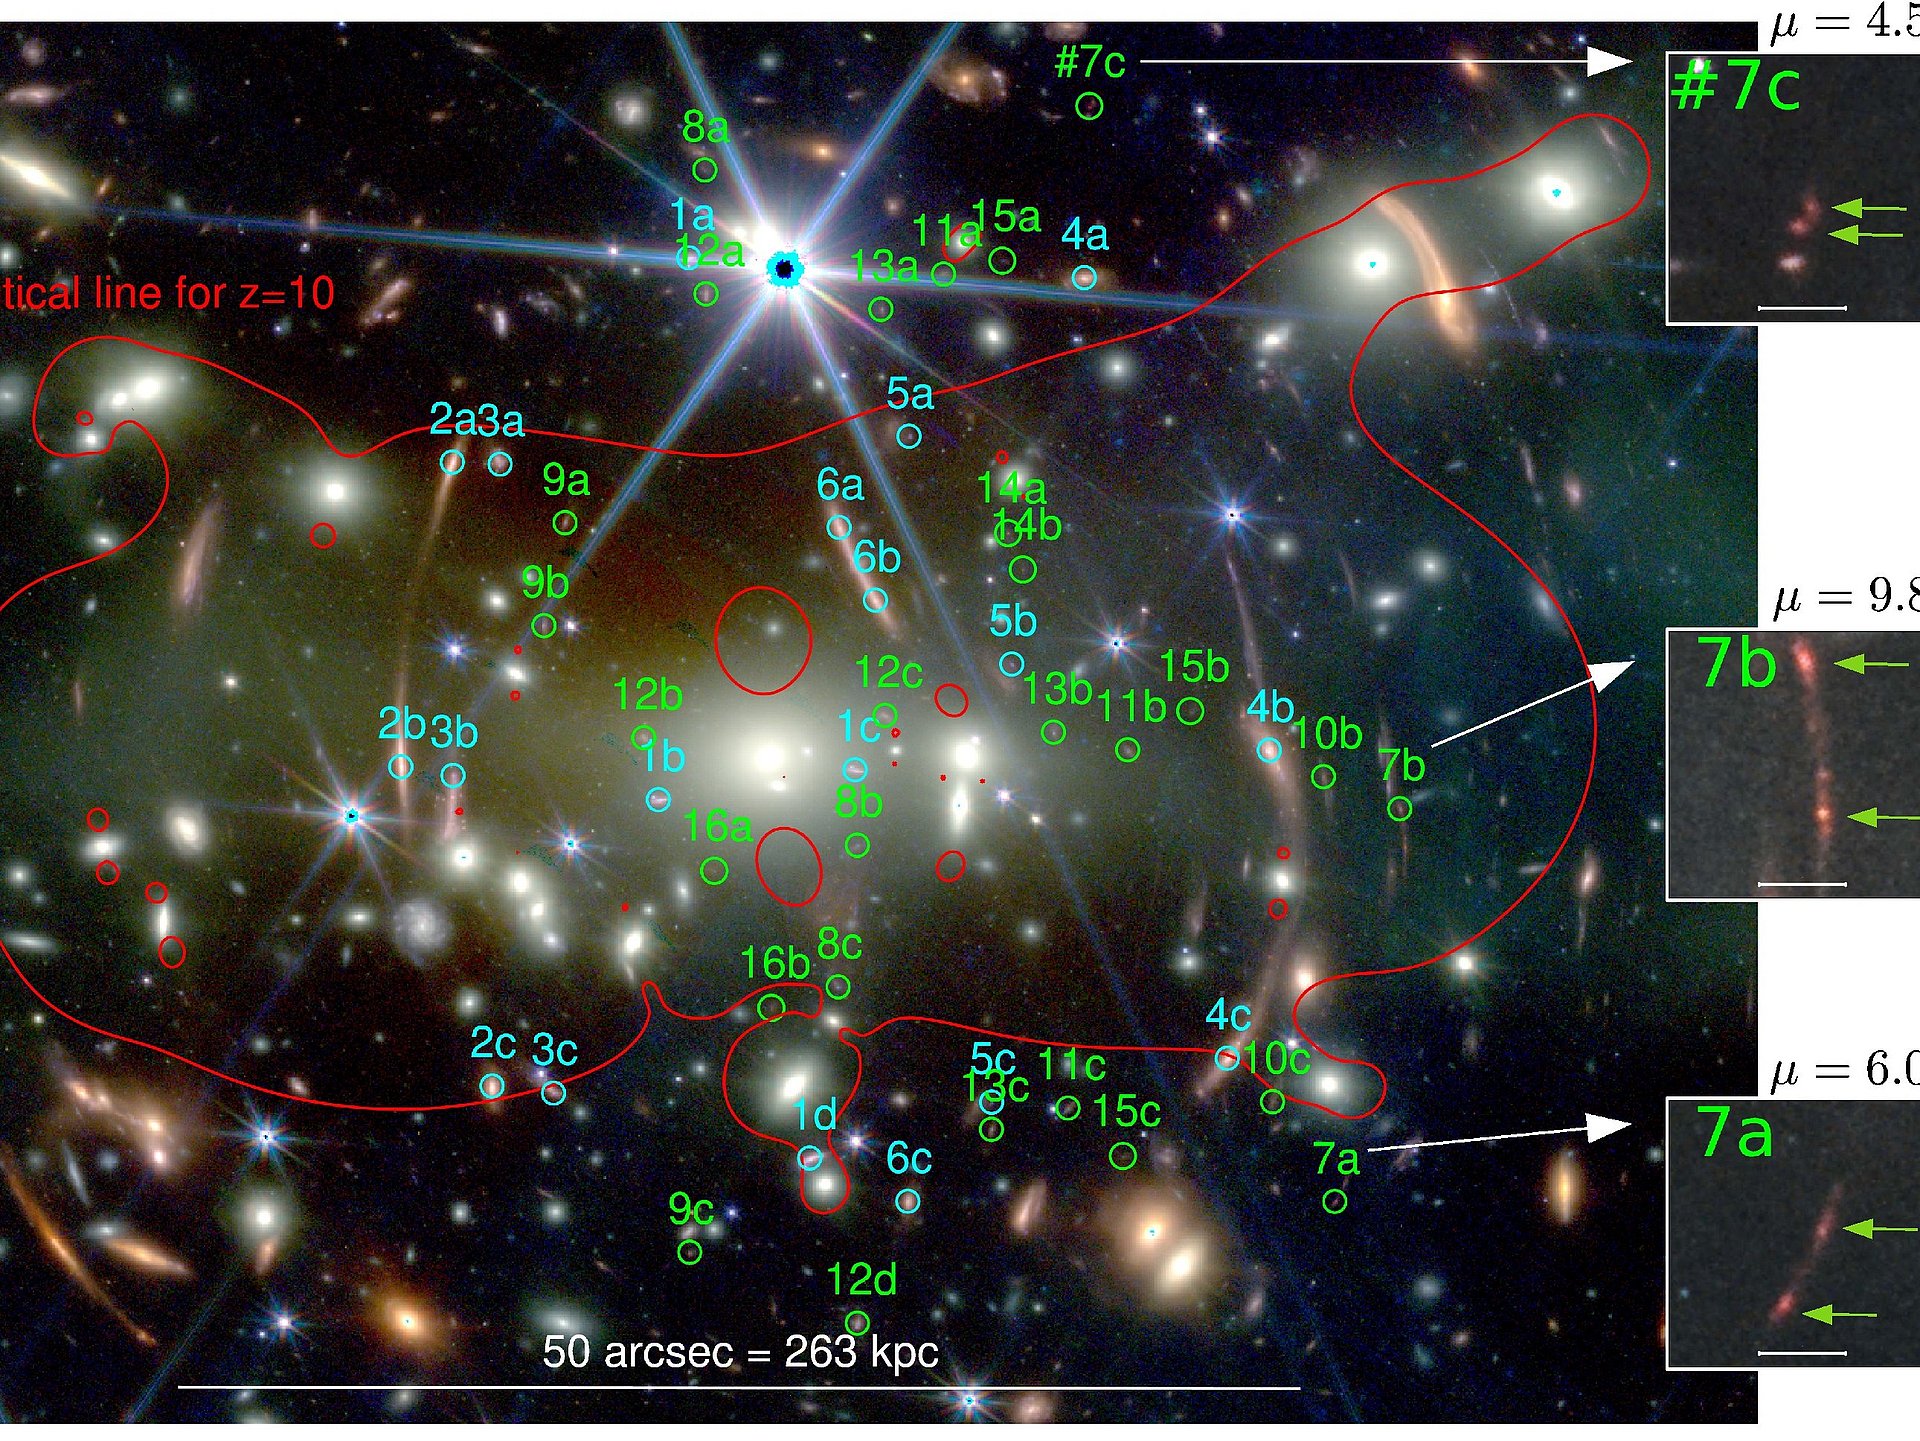 In this image, the various multiply lensed background galaxies are numbered, with cyan colours indicating already known multiple image systems and green colours indicating new multiply lensed sources. The insets show enlarged images of a very distant galaxy with some substructure indicated by the green arrows.